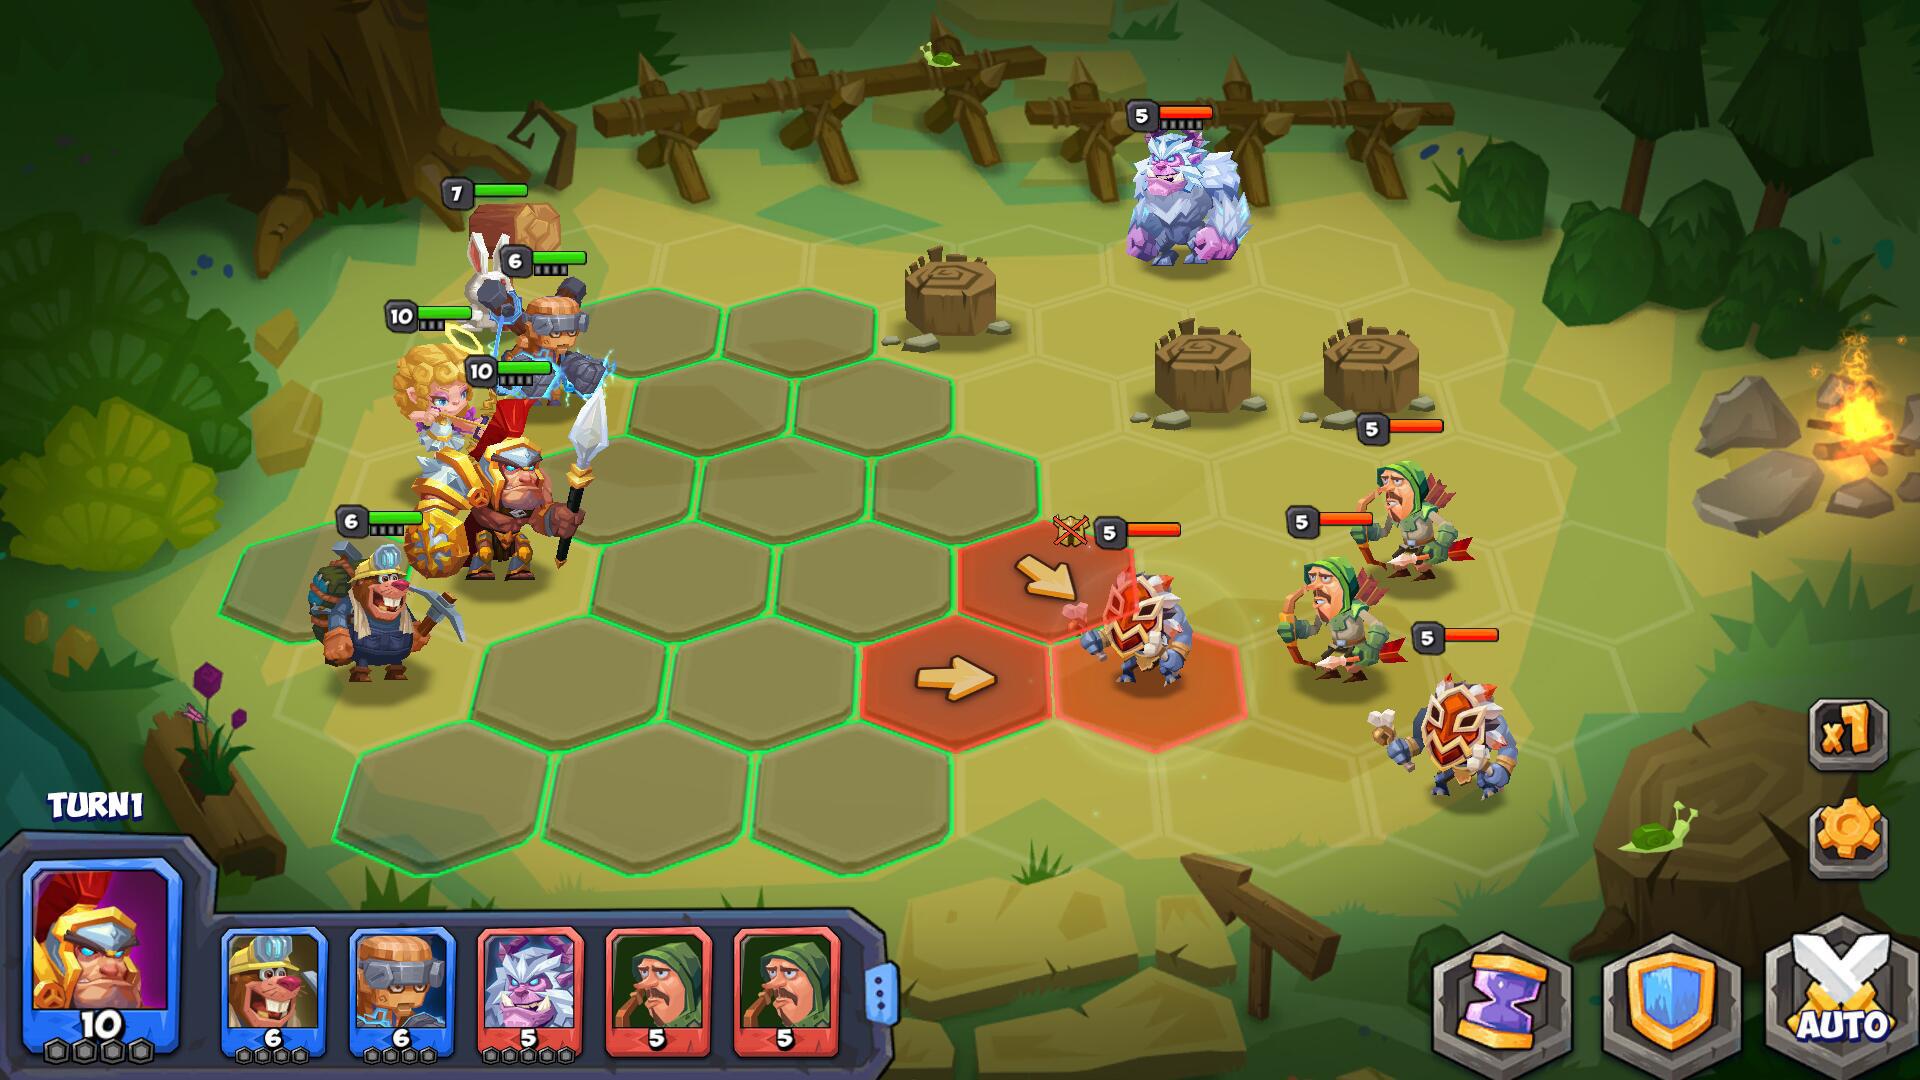 Screenshot №1 from game Tactical Monsters Rumble Arena